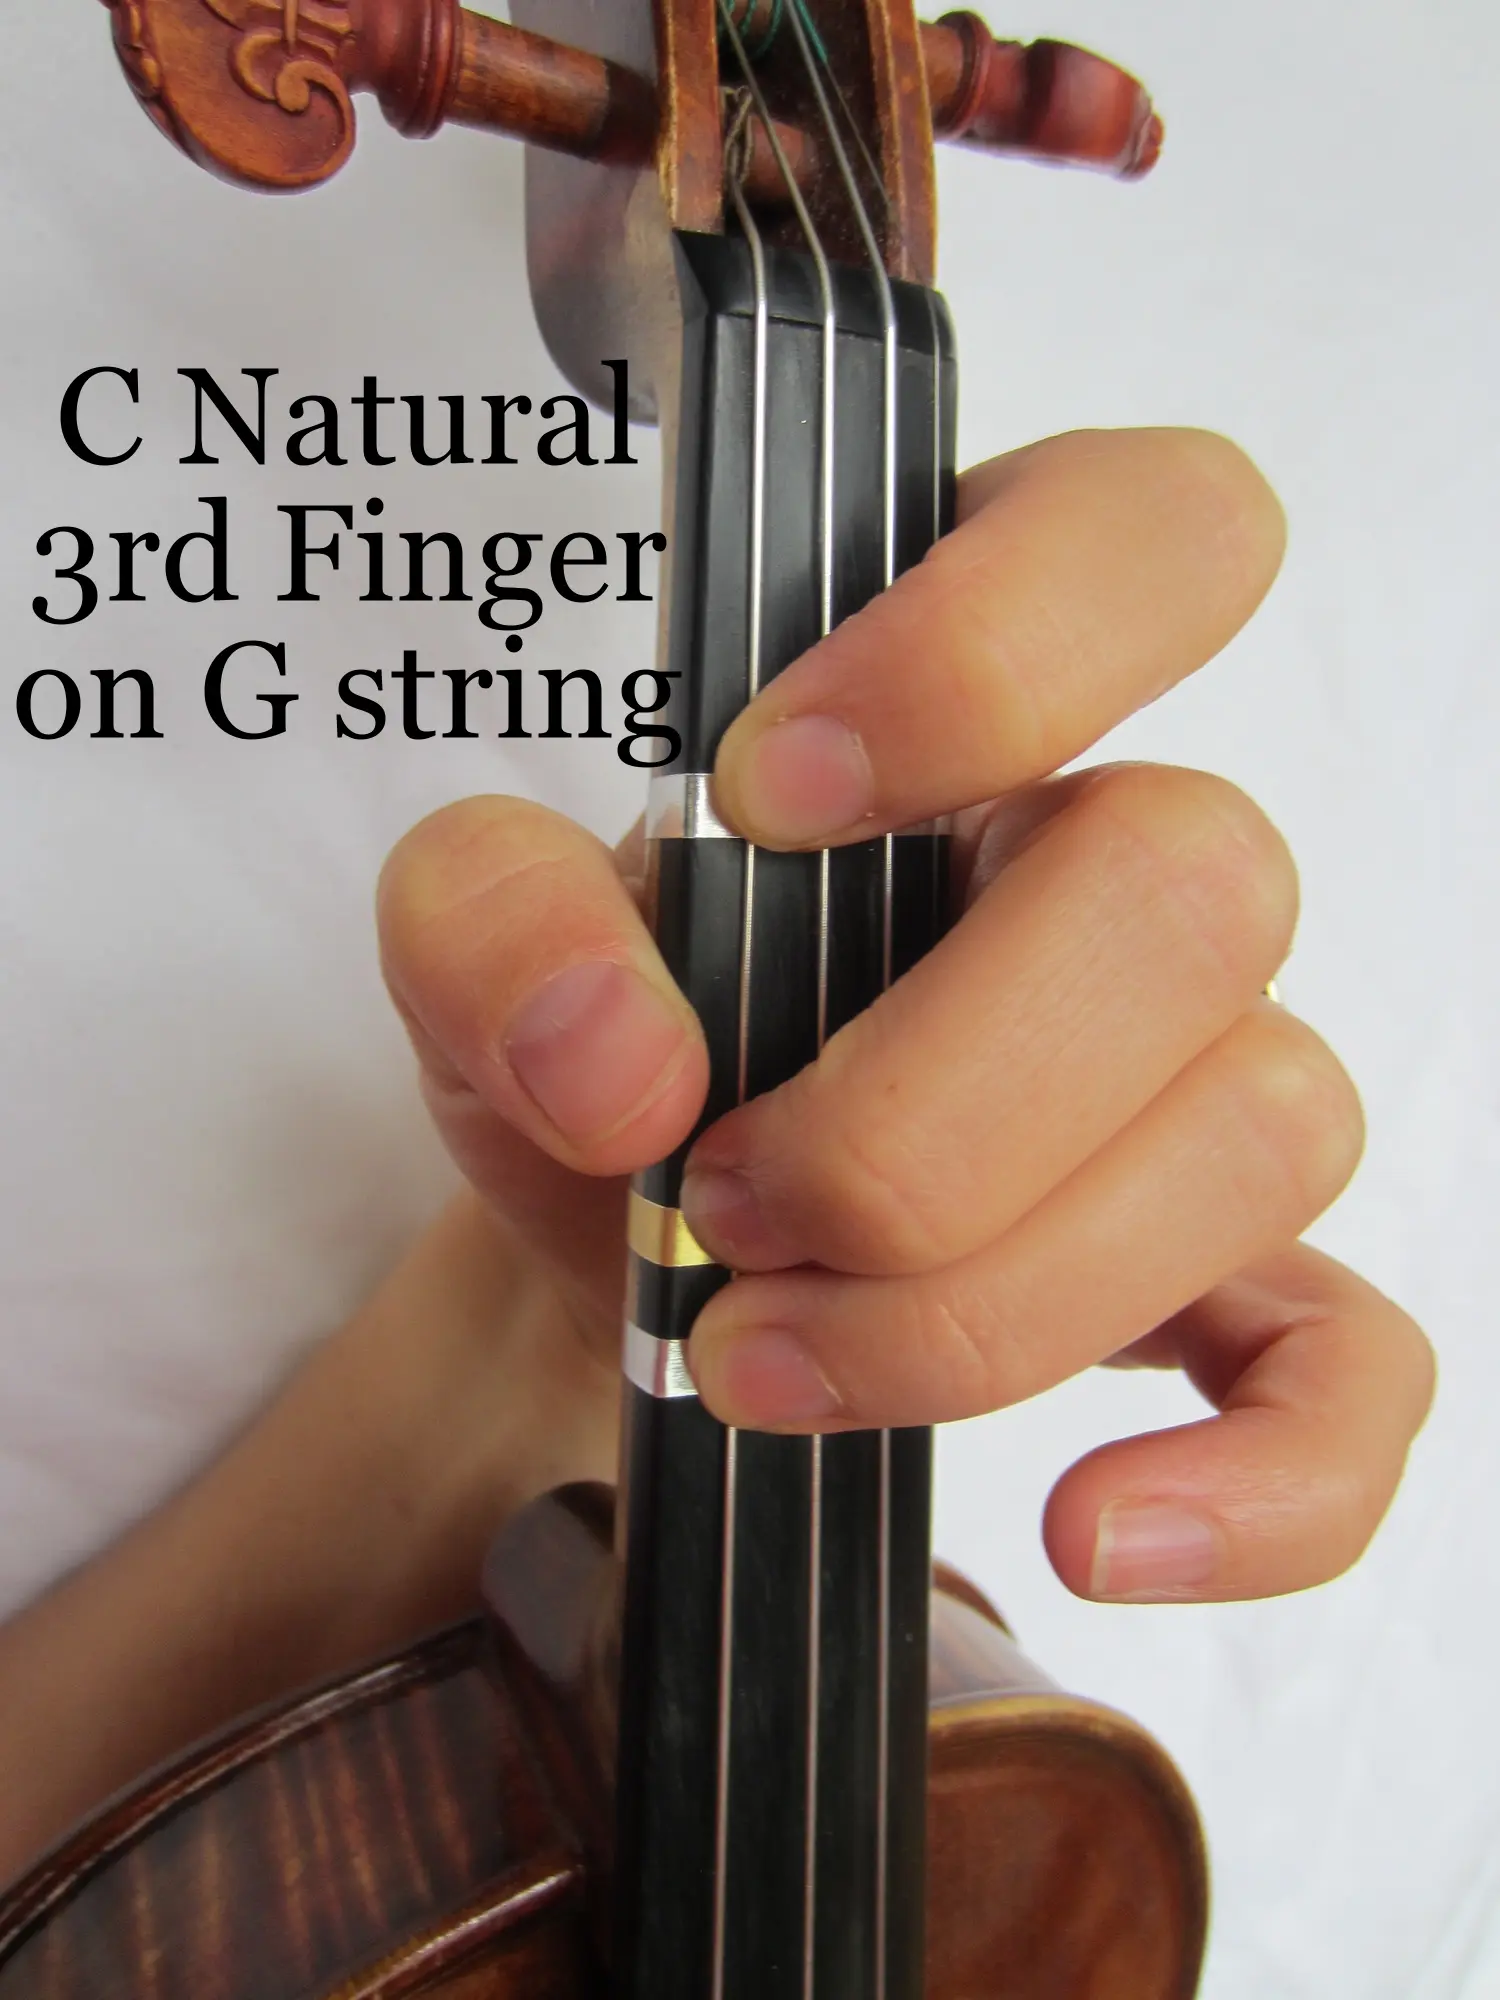 c on violin - What is the C key on a violin